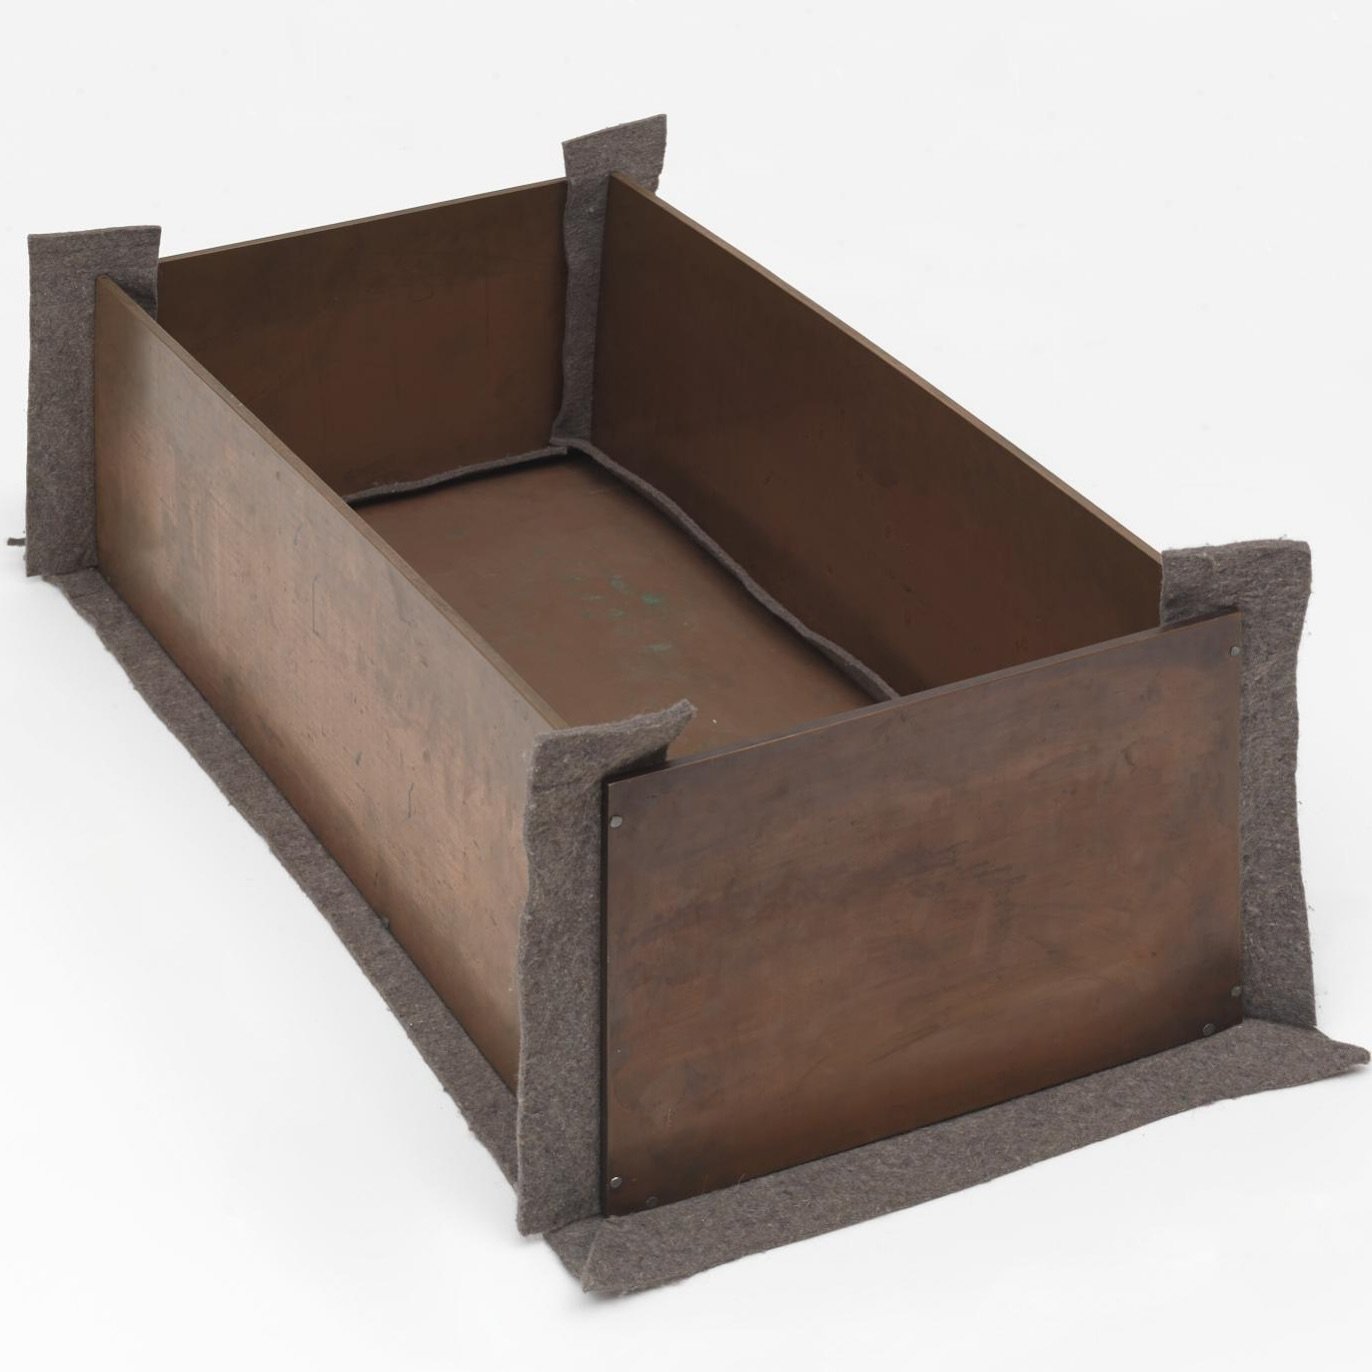 &ldquo;Dumb Box&rdquo; by Joseph Beuys: a testament to the fusion of science and spirit. Copper, conductor of energy, meets felt, the silent absorber. His innovative use of felt inspired Jim to explore its tactile depths.

#josephbeuys #artisticalche